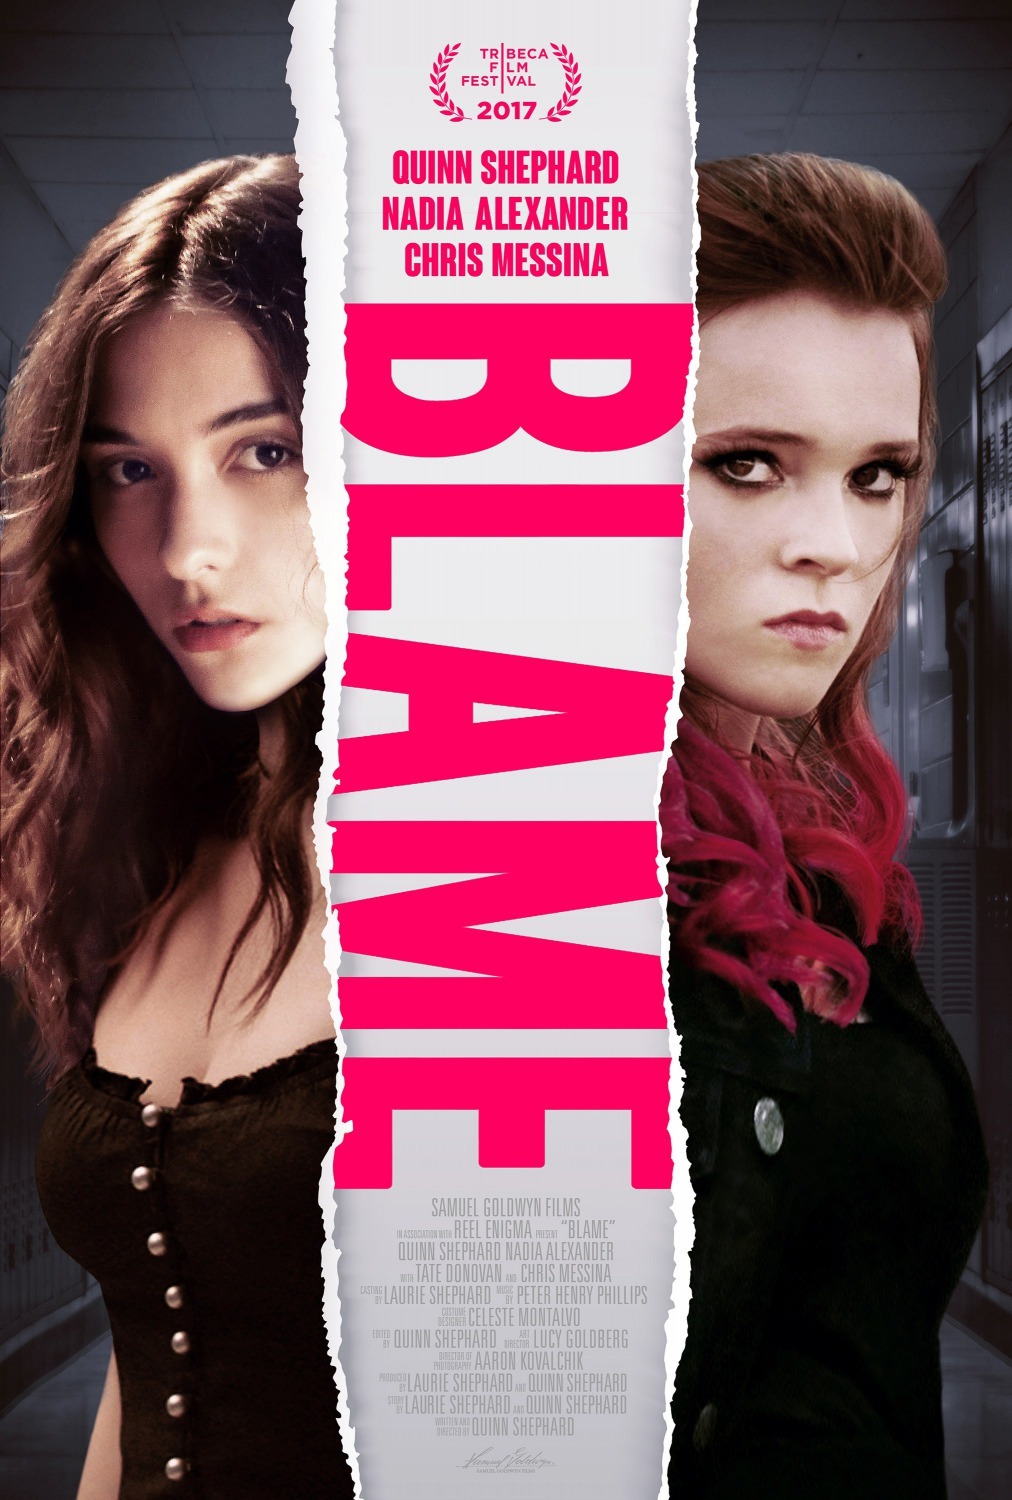 Blame is a 2017 American teen psychological drama film written, co-produced, edited, and directed by Quinn Shephard, who also stars alongside Nadia Alexander, Tate Donovan, and Chris Messina. The film is Shephard's feature film directorial debut.